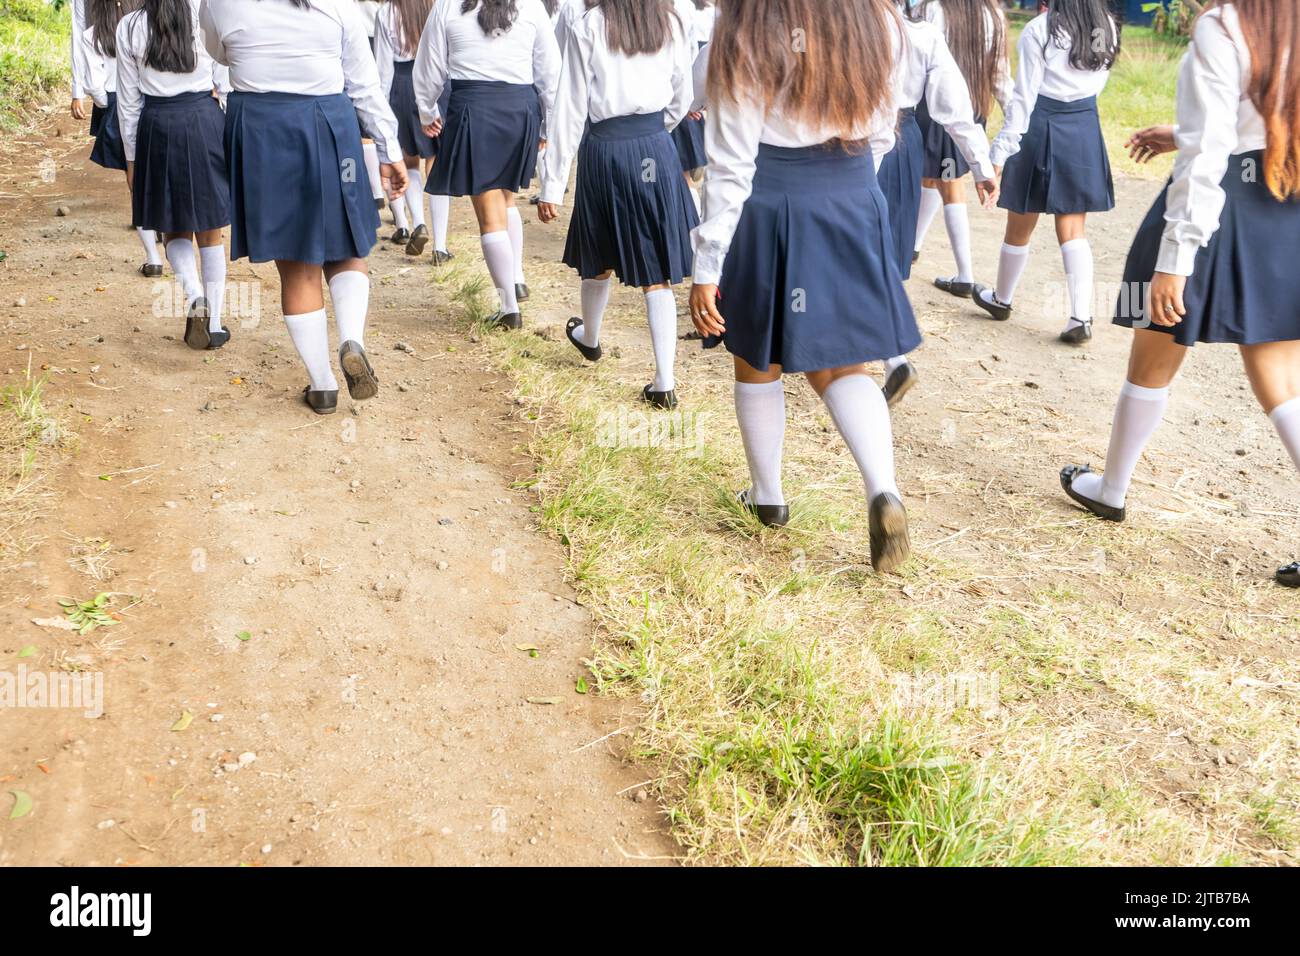 Group of high school student girls walking and wearing uniforms Stock Photo